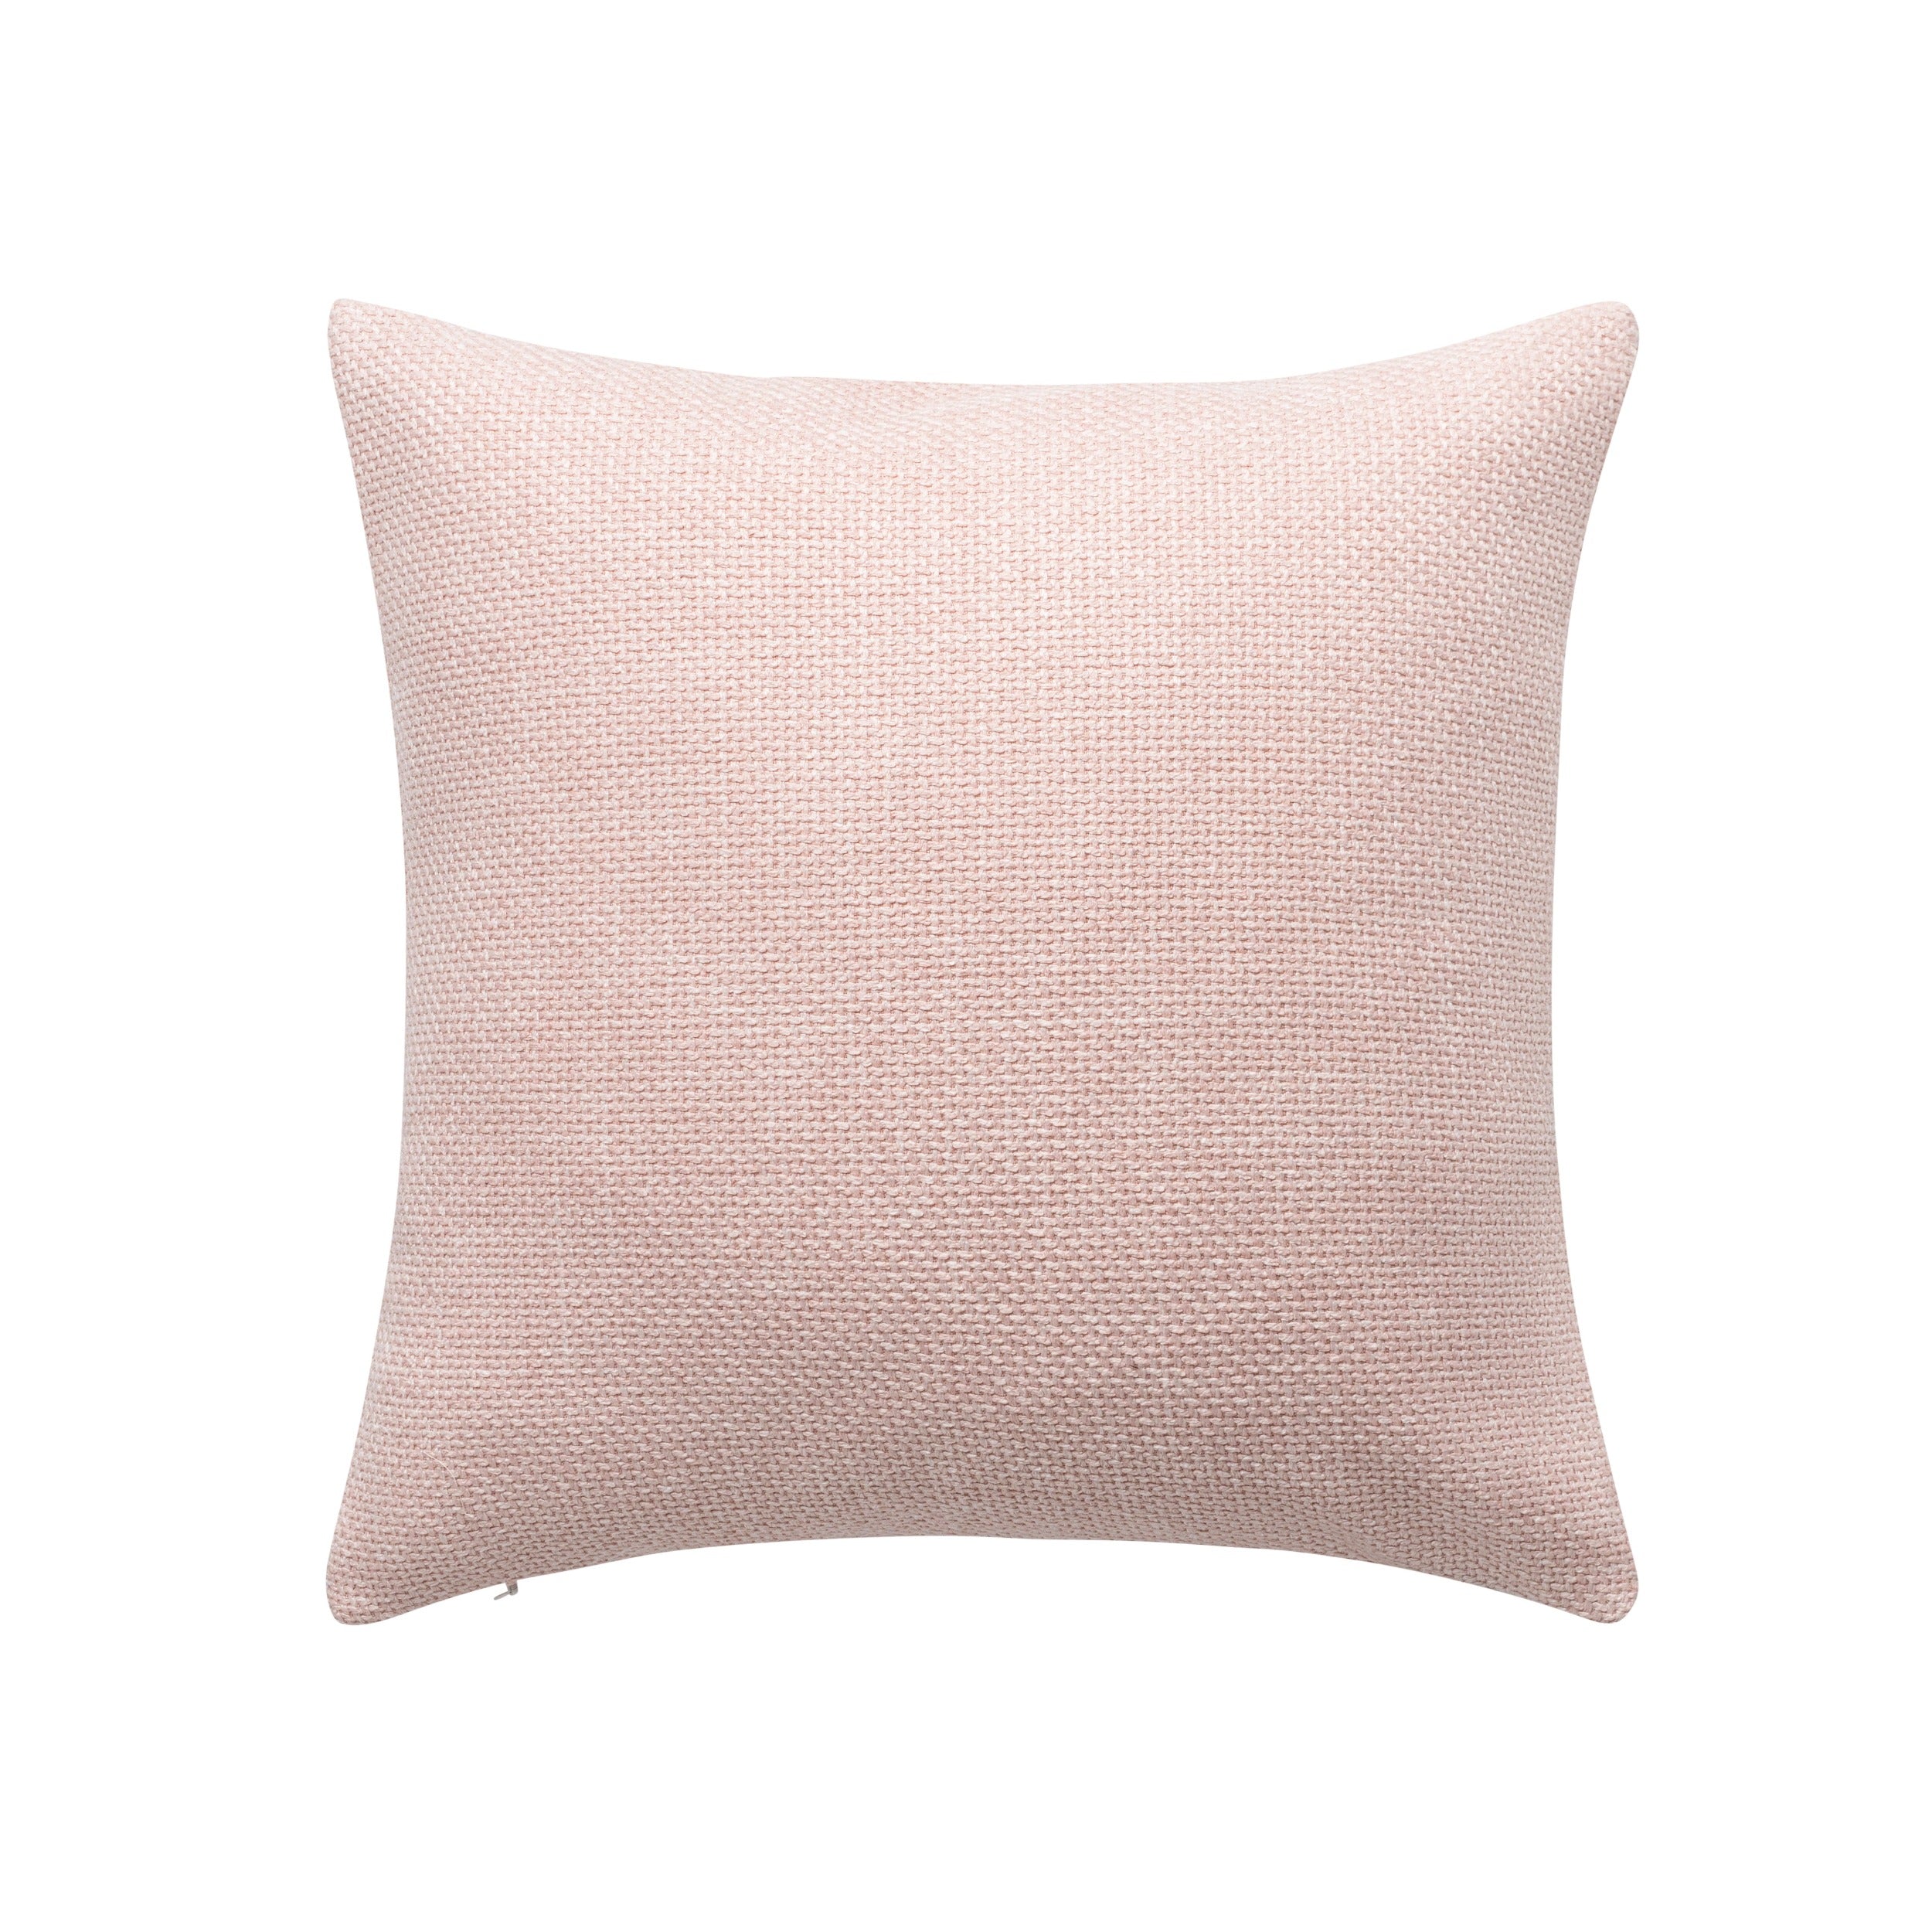 Petite Belle Ballet Pink Textured Throw Pillow with White Piping